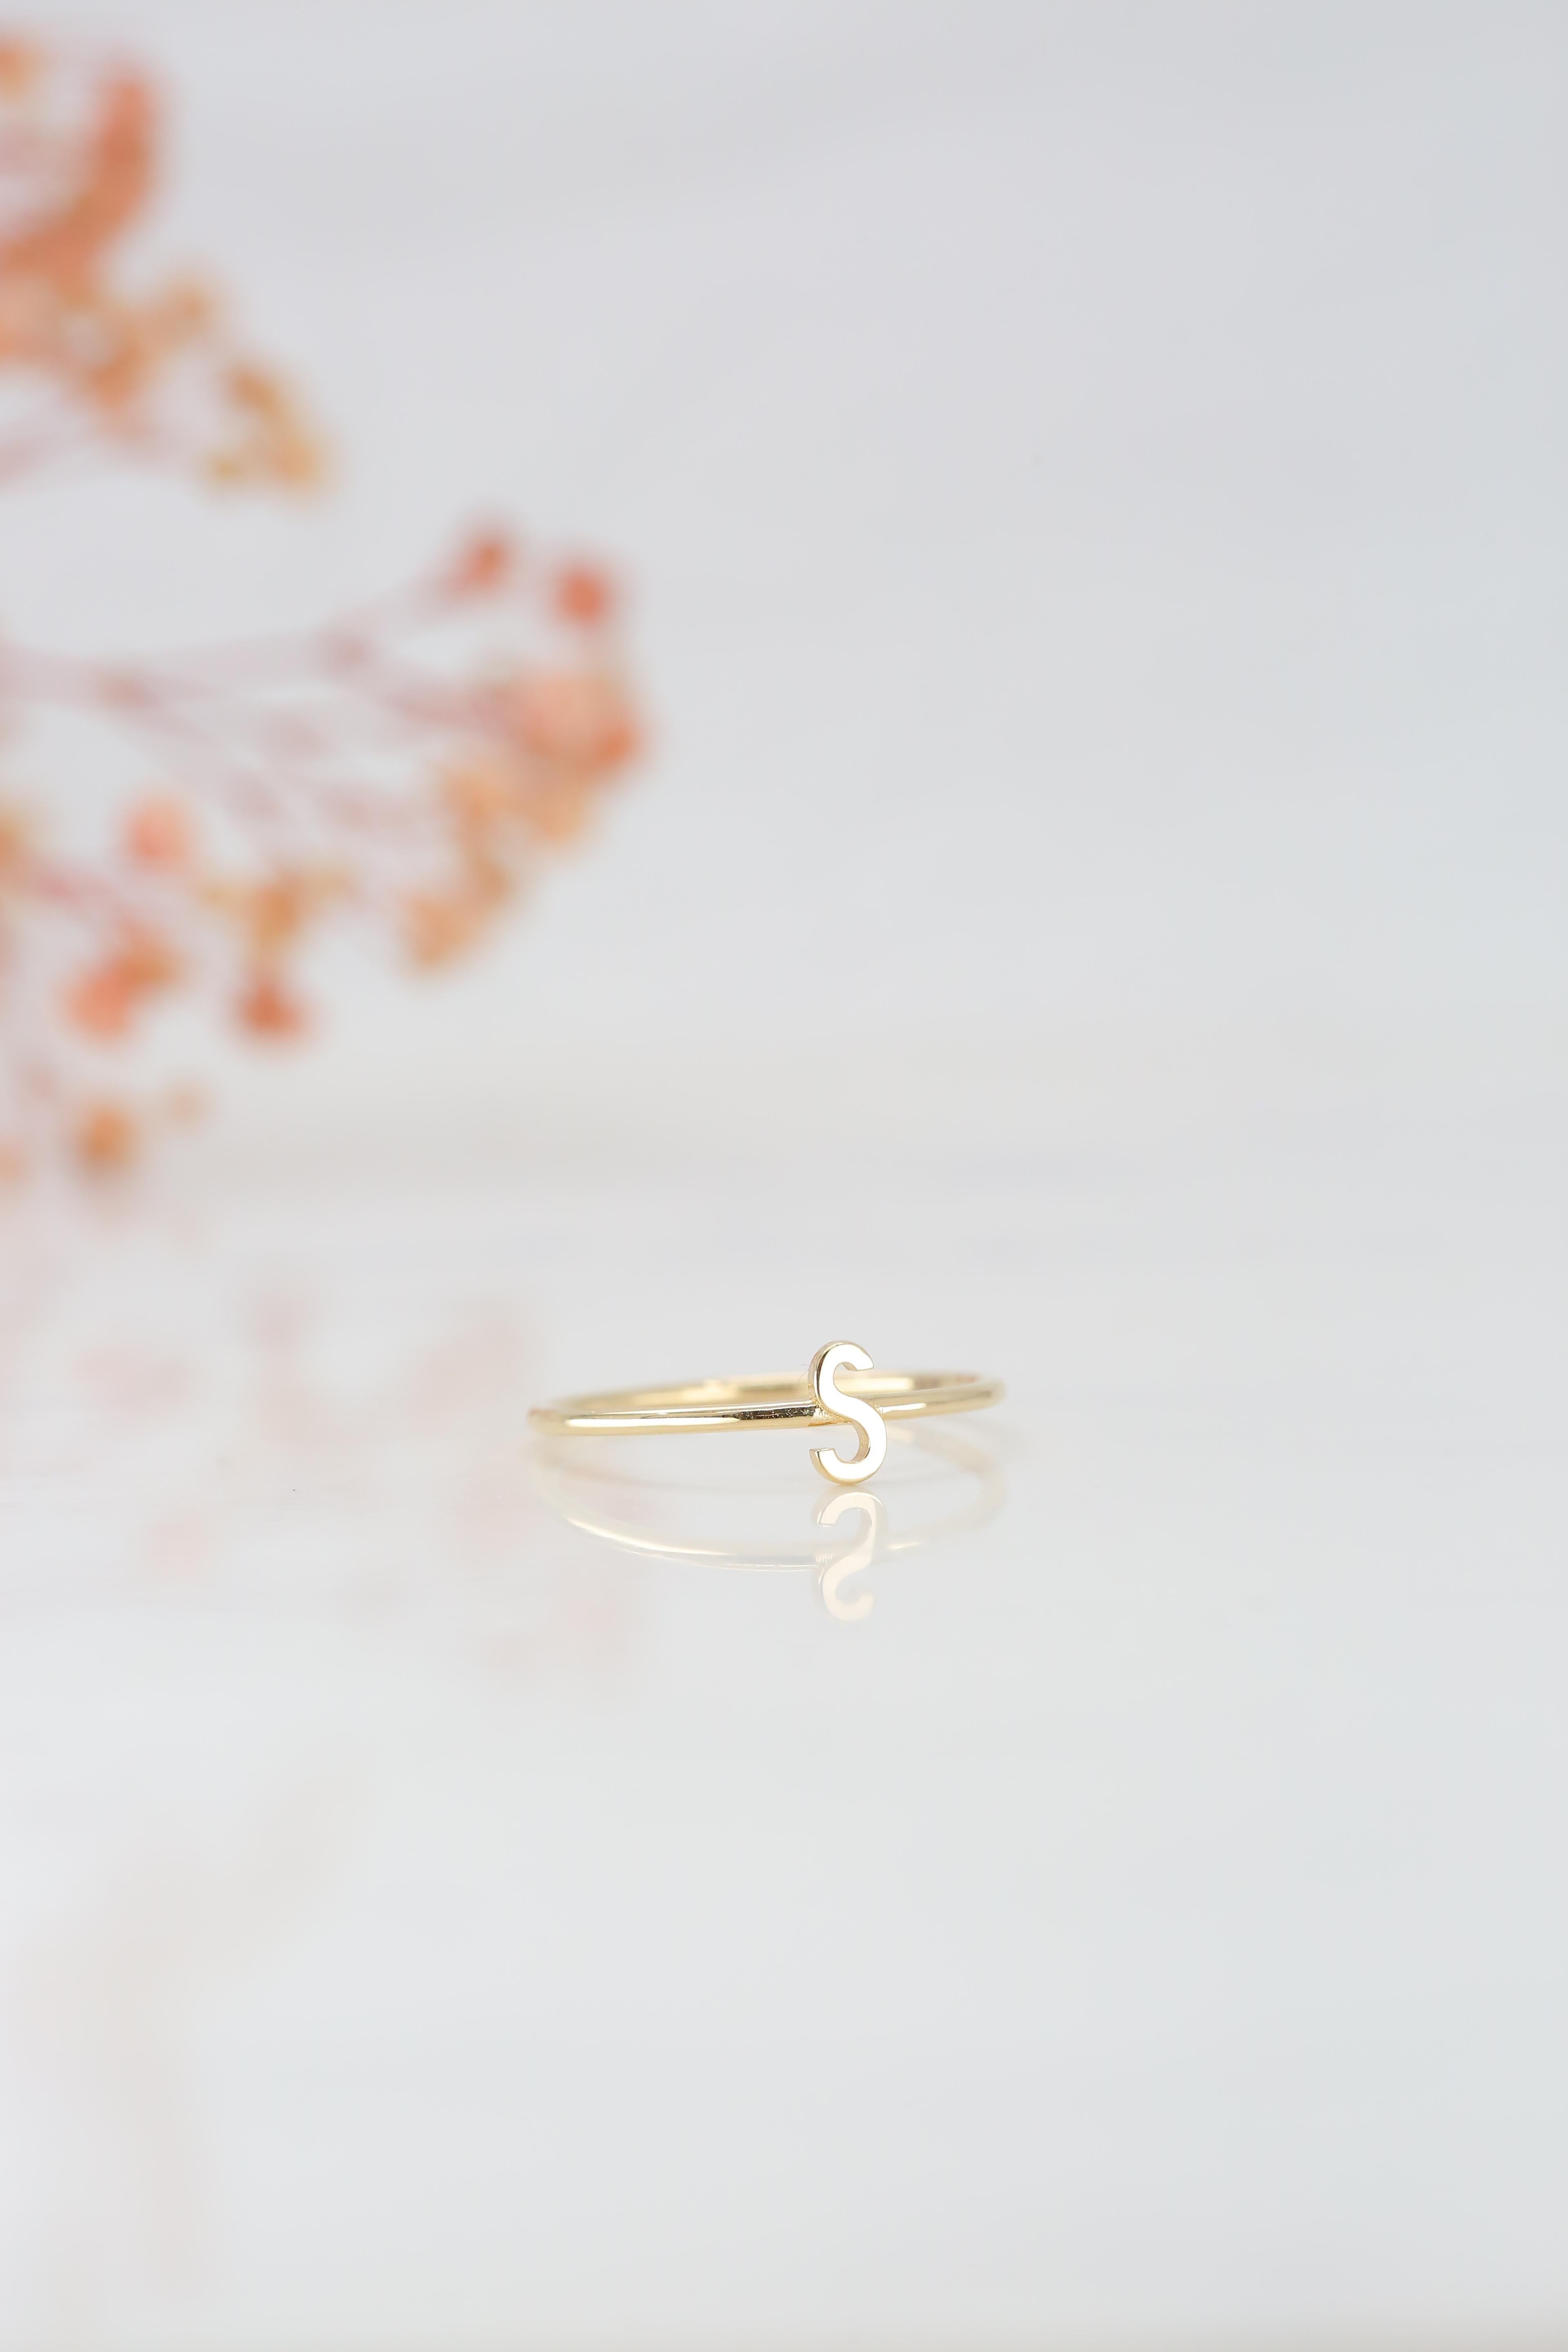 For Sale:  14K Gold Initial S Letter Ring, Personalized Initial Letter Ring 7